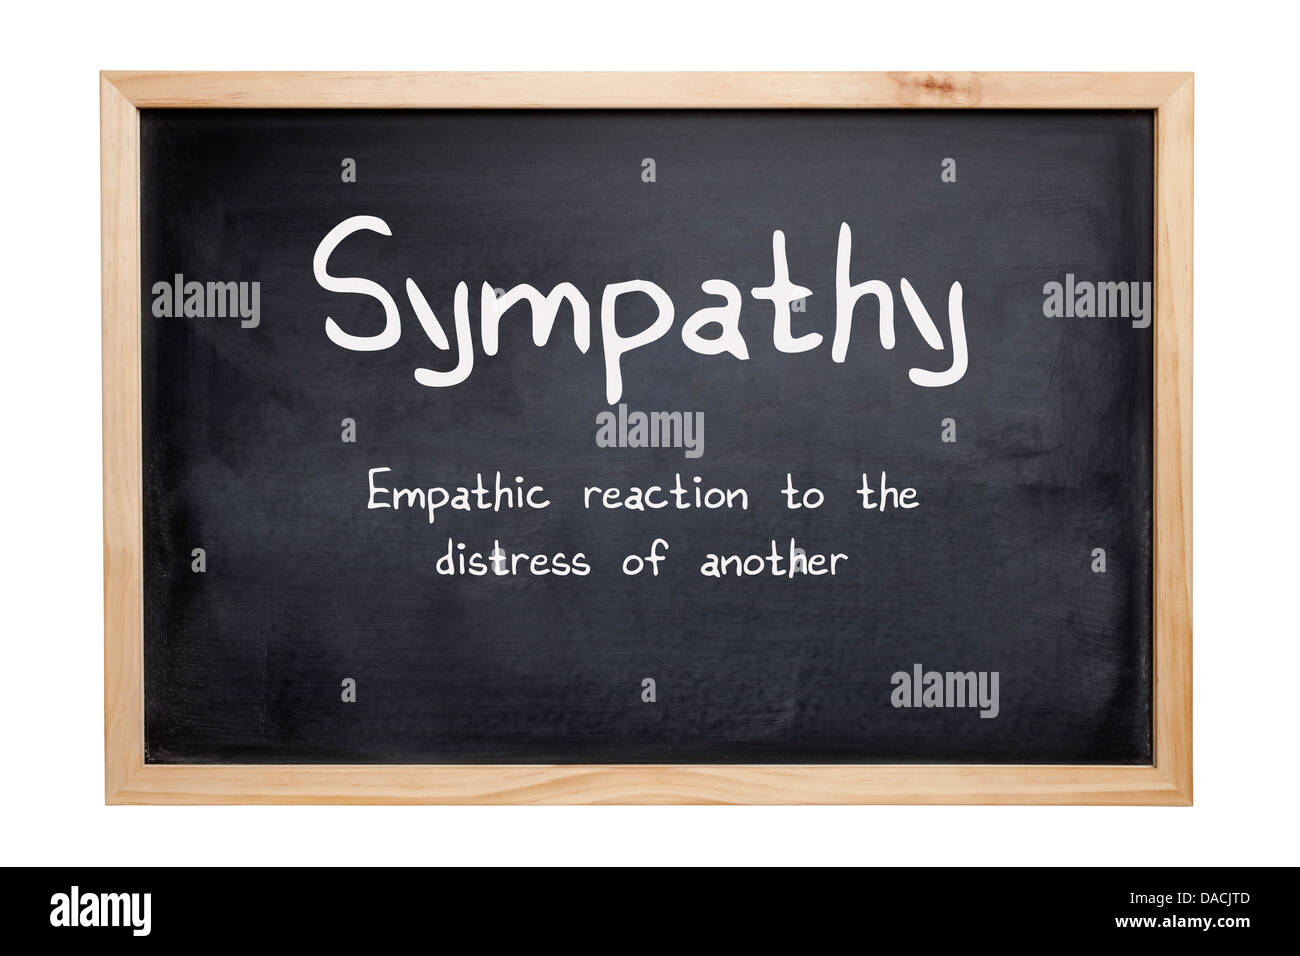 Sympathy Concept - a blackboard with the words Sympathy, an empathic reaction to the distress of another... Stock Photo